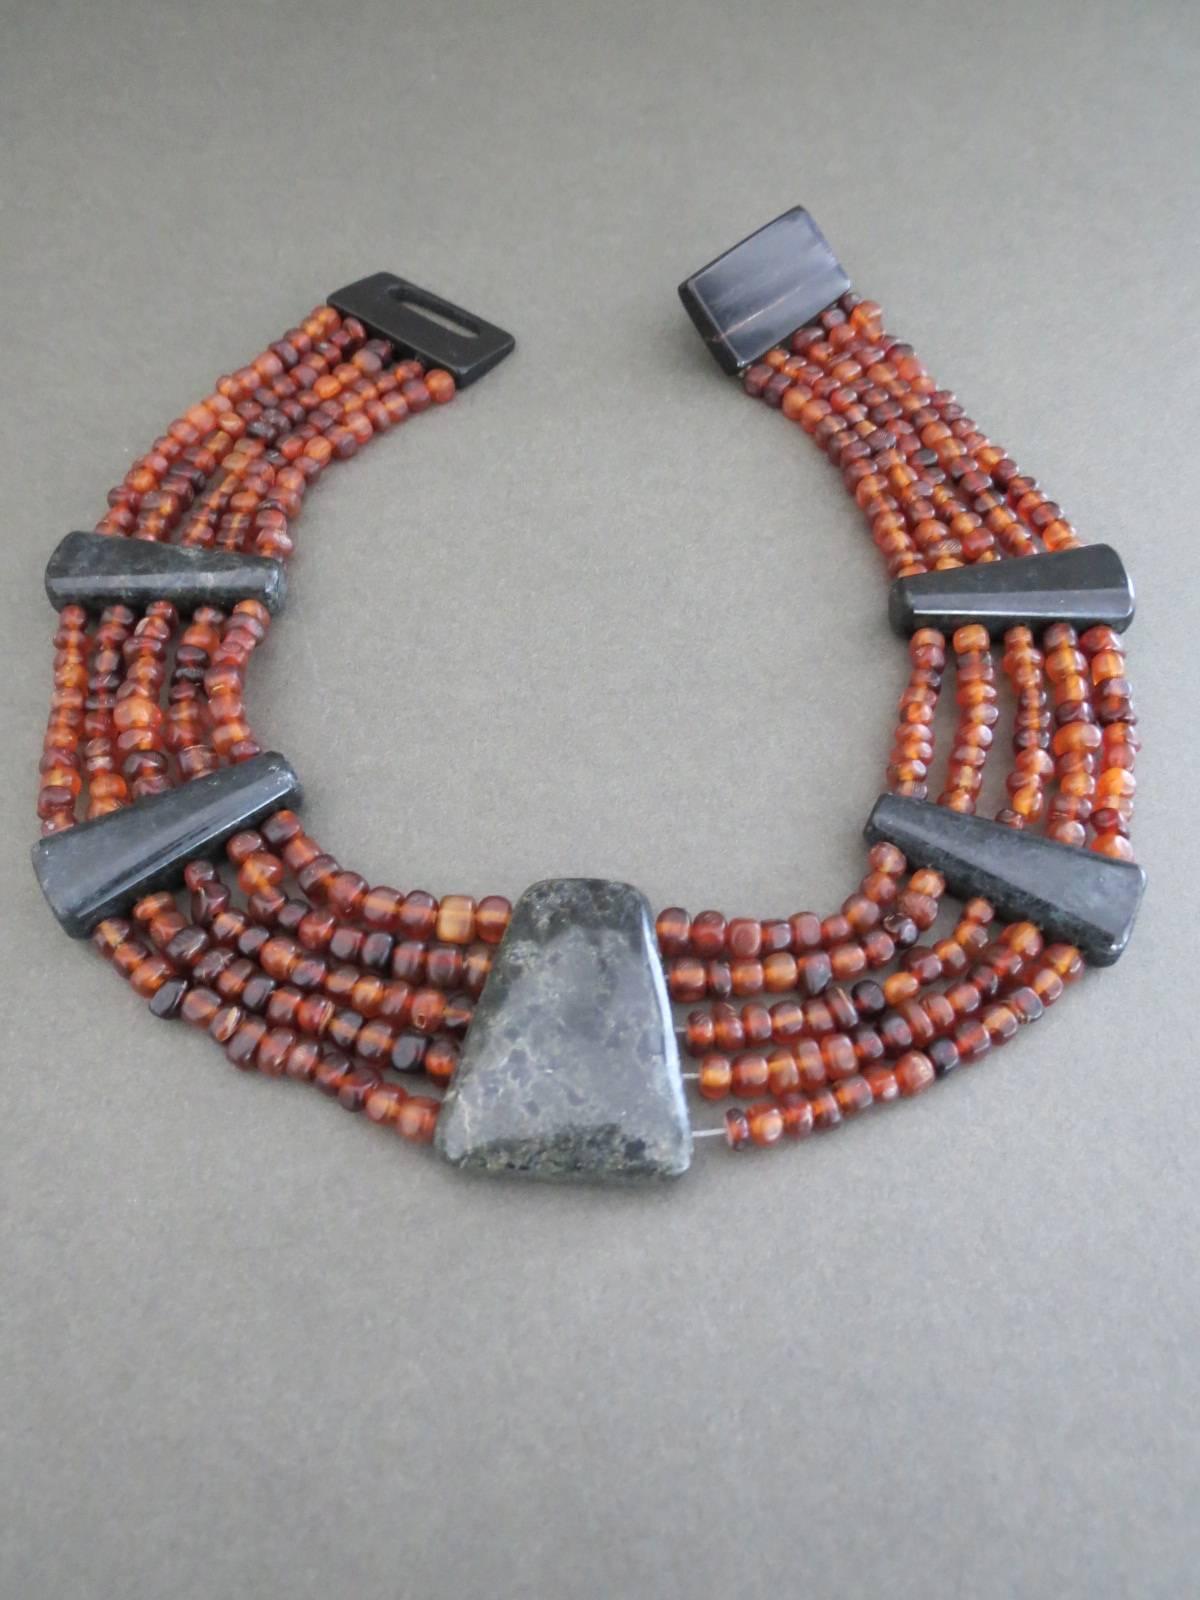 This is lovely Danish Monies necklace designed by Gerda Lynggaard . Necklace is made of Soldalite ,Baltic Amber and Horn. Lovely condition.
Item Specifics
Length: 40cm (approx 15.50